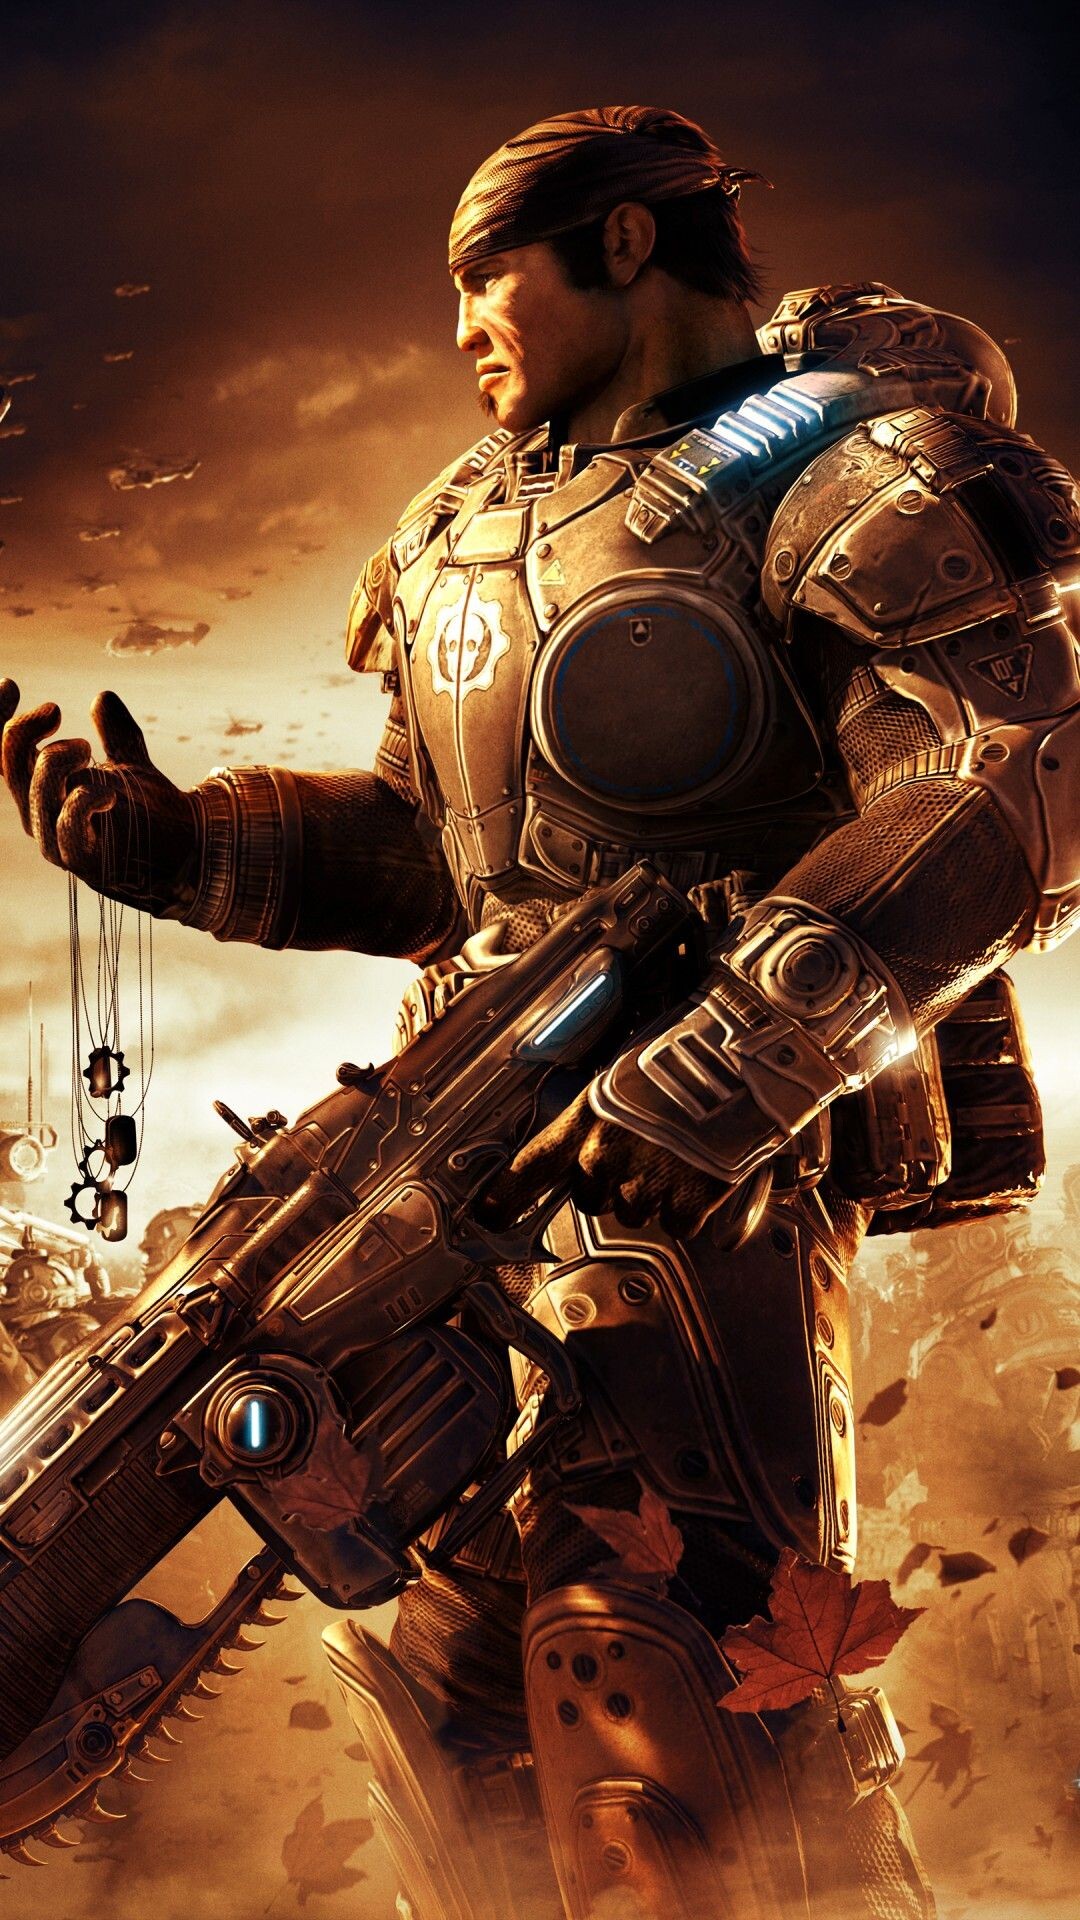 Gears of War 2, Epic battles, Post-apocalyptic world, Intense gaming experience, 1080x1920 Full HD Phone